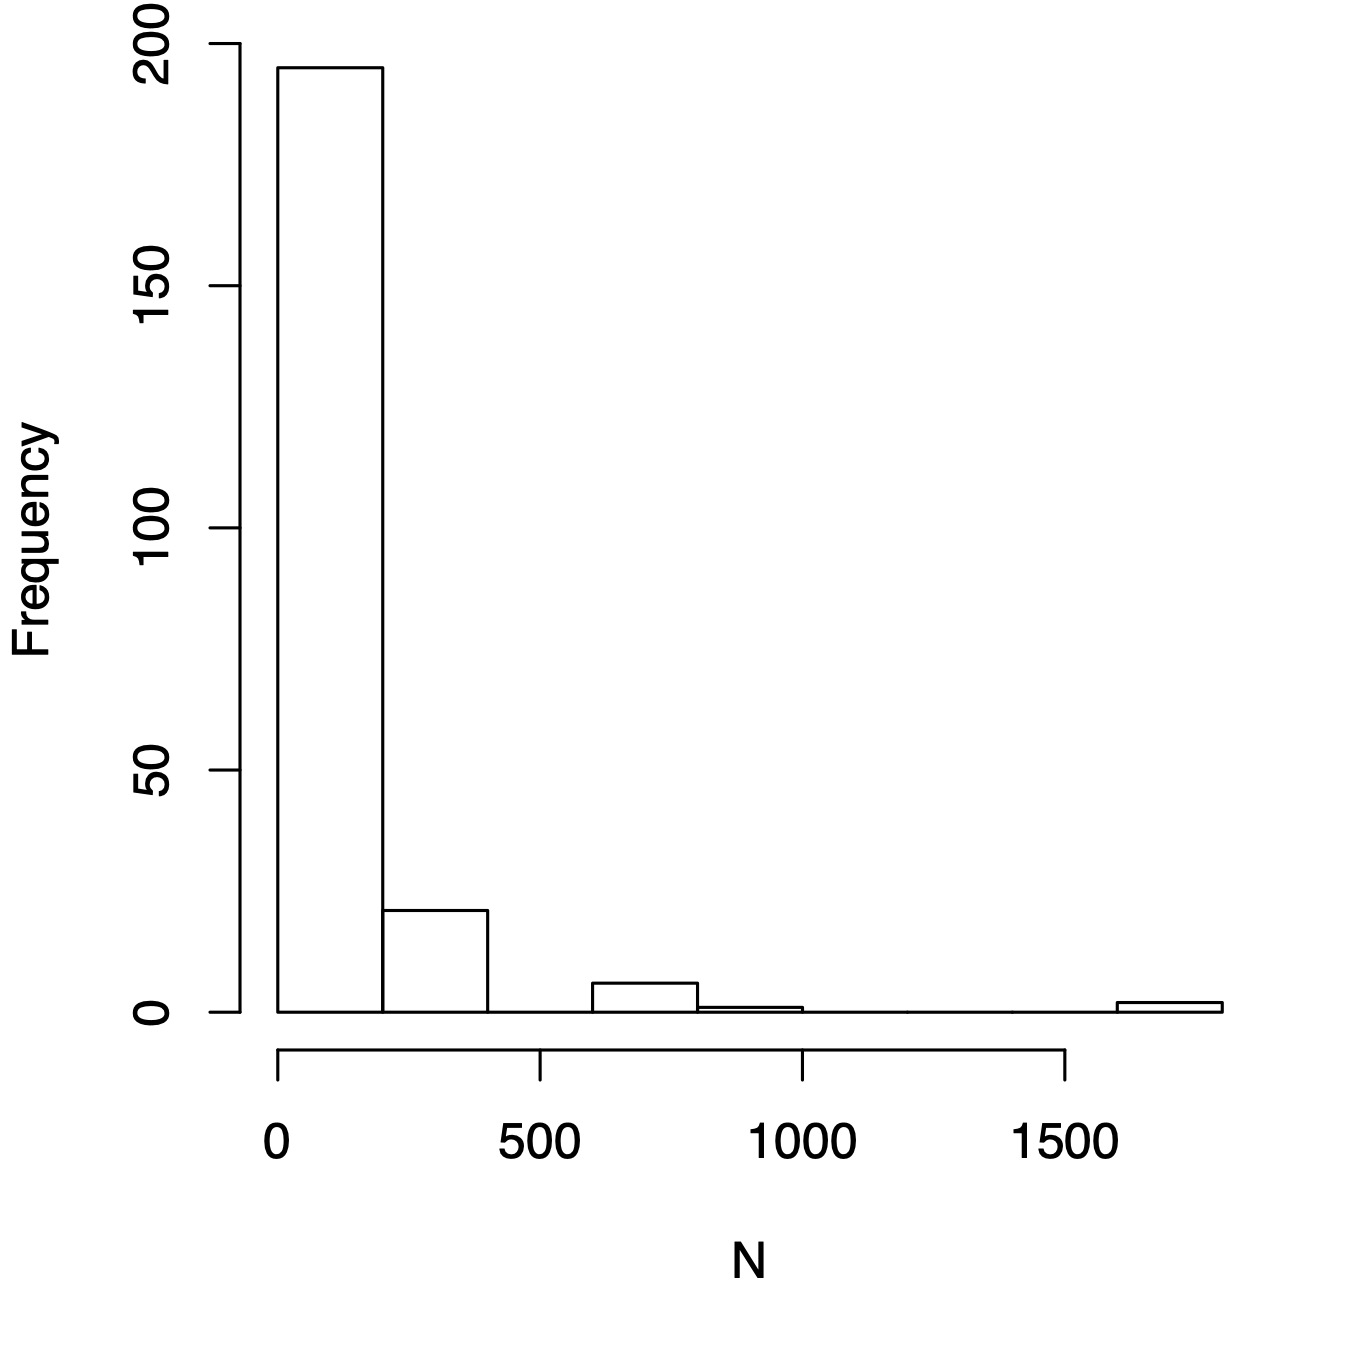 Three related types of distributions of tree species densities from Barro Colorado Island. Left, histogram of raw data; center, the species--abundance distribution, which is a histogram of log-transformed abundances, accompanied here by the normal probability density function; right, the rank--abundance distribution, as typically presented with the log-transformed data, with the complement of the cumulative probability density function (1-pdf). Normal distributions were applied using the mean and standard deviation from the log-transformed data, times the total number of species.